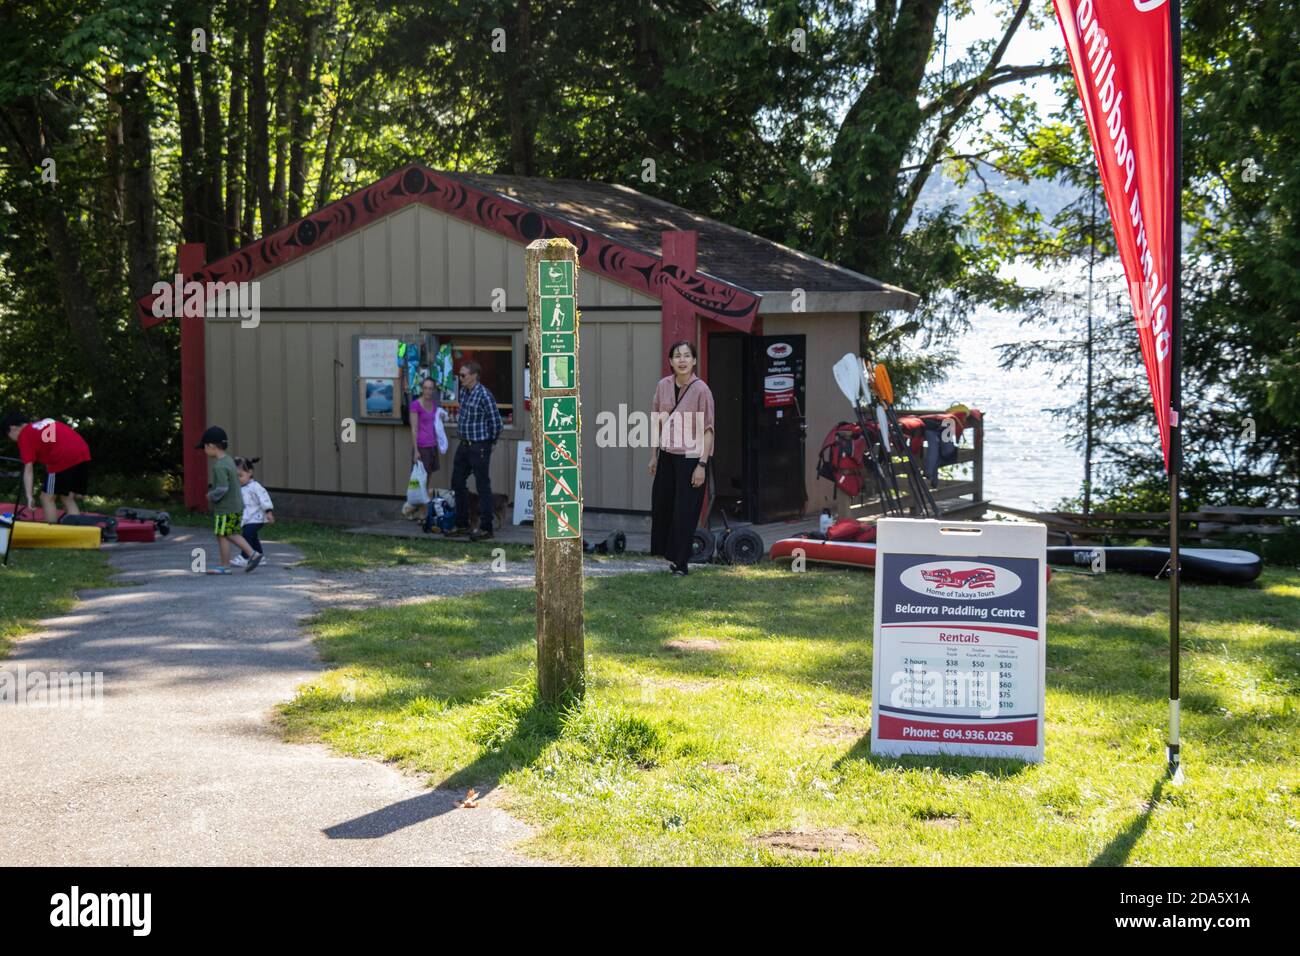 Belcarra, Canada - July 13,2020: View of information curb sign 'Belcarra Paddling Centre' with rental prices in Belcarra Regional Park Stock Photo